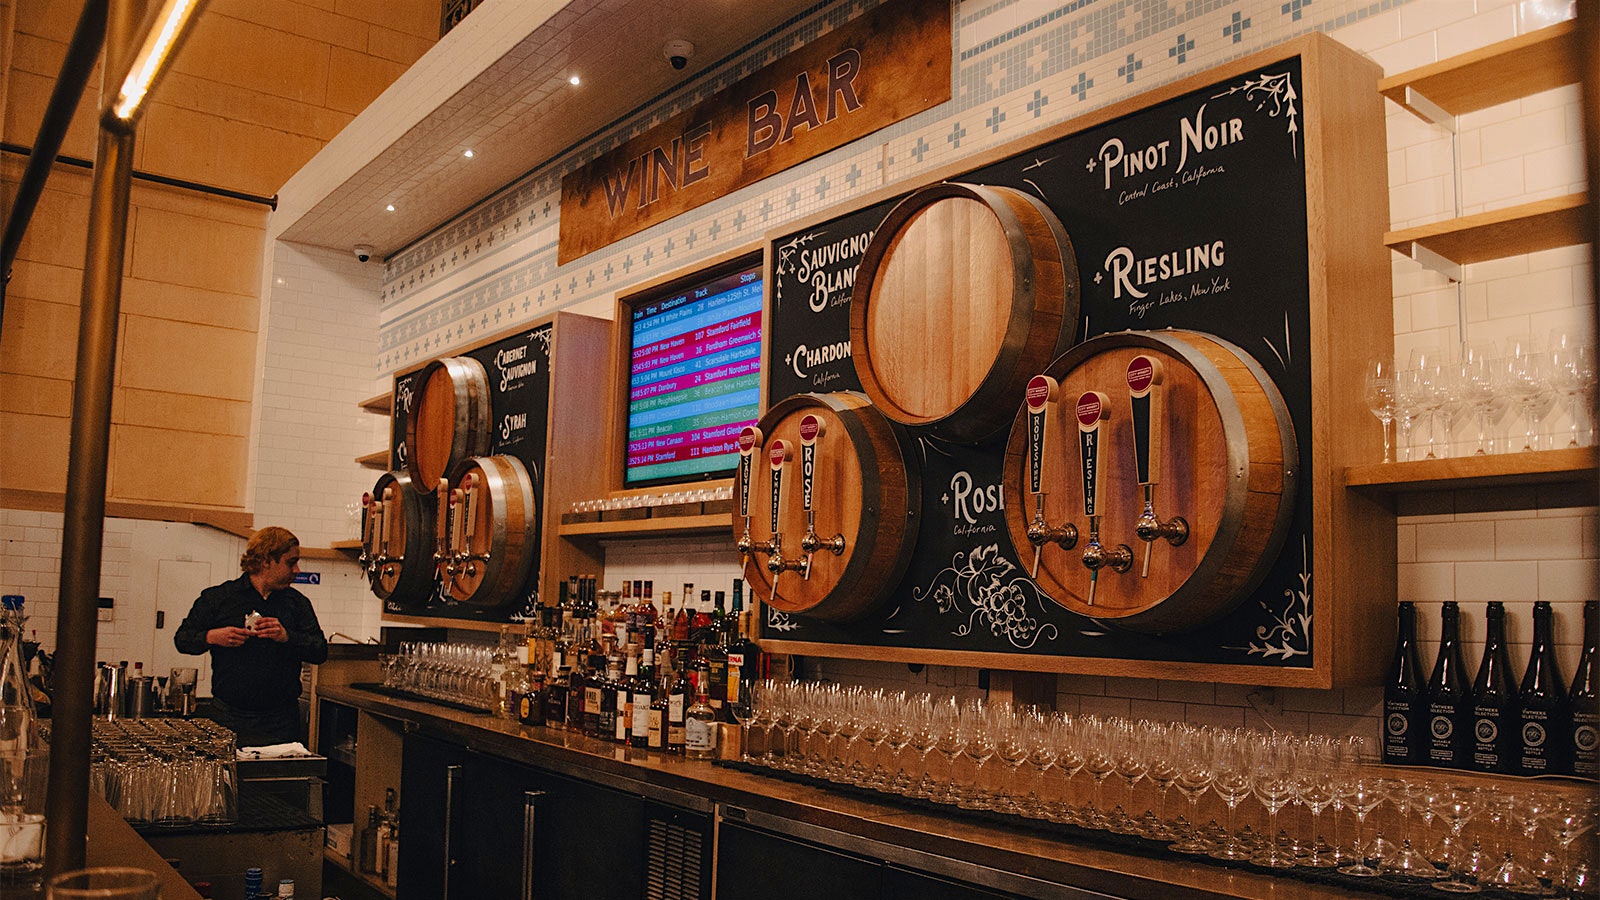  A bar at City Winery in Grand Central with wine in kegs on tap, with a screen displaying train departures.